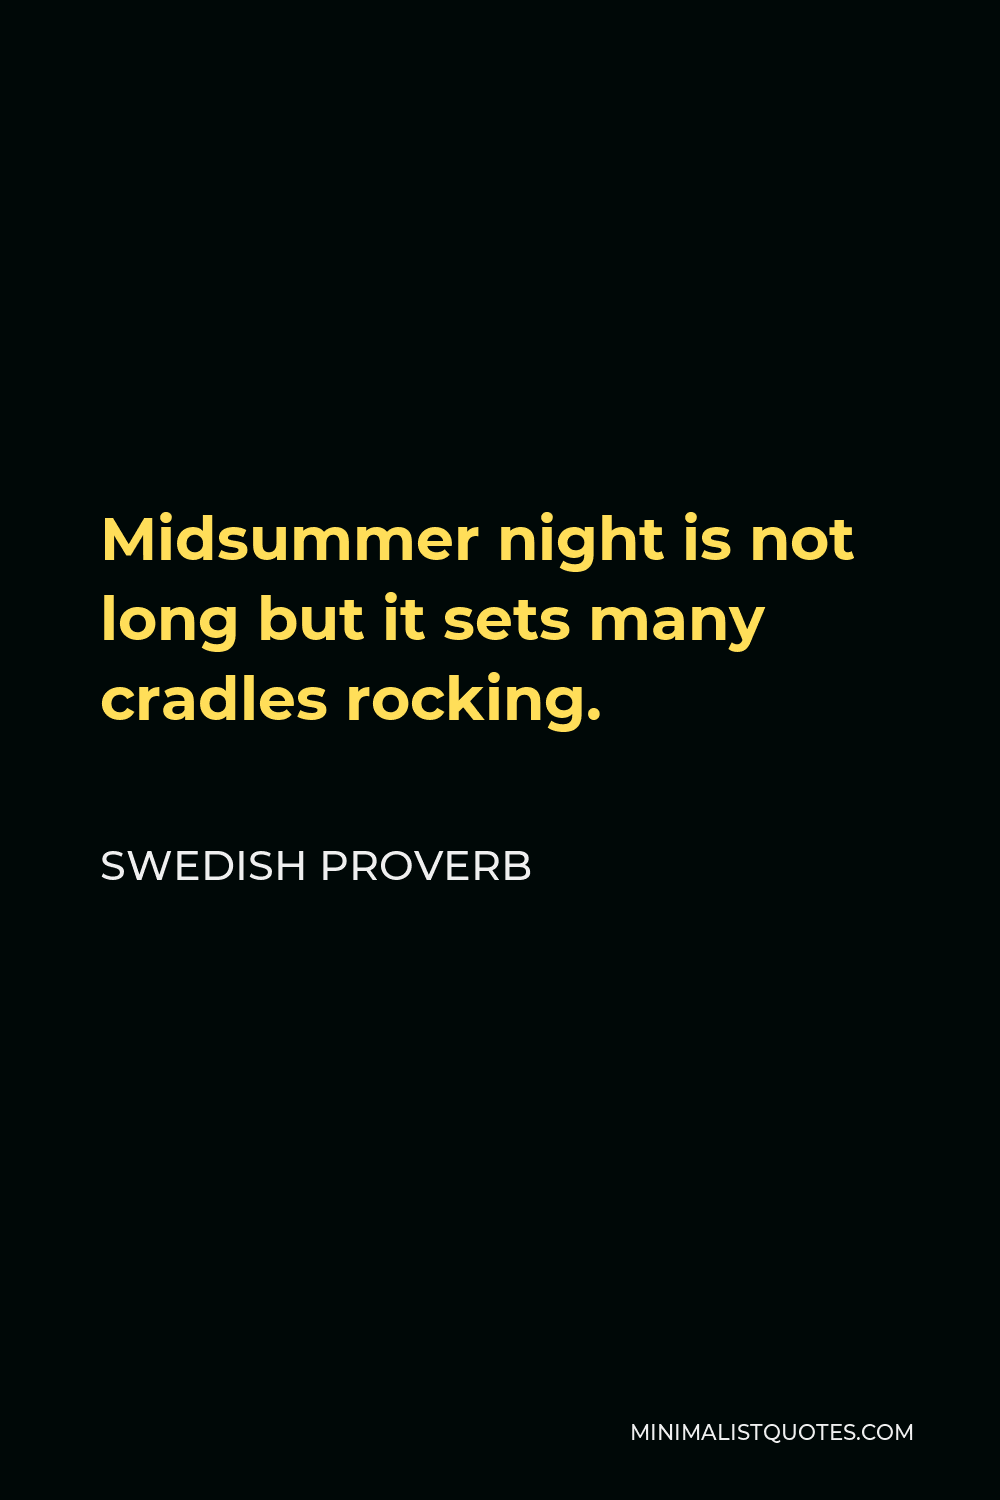 Swedish Proverb Quote - Midsummer night is not long but it sets many cradles rocking.